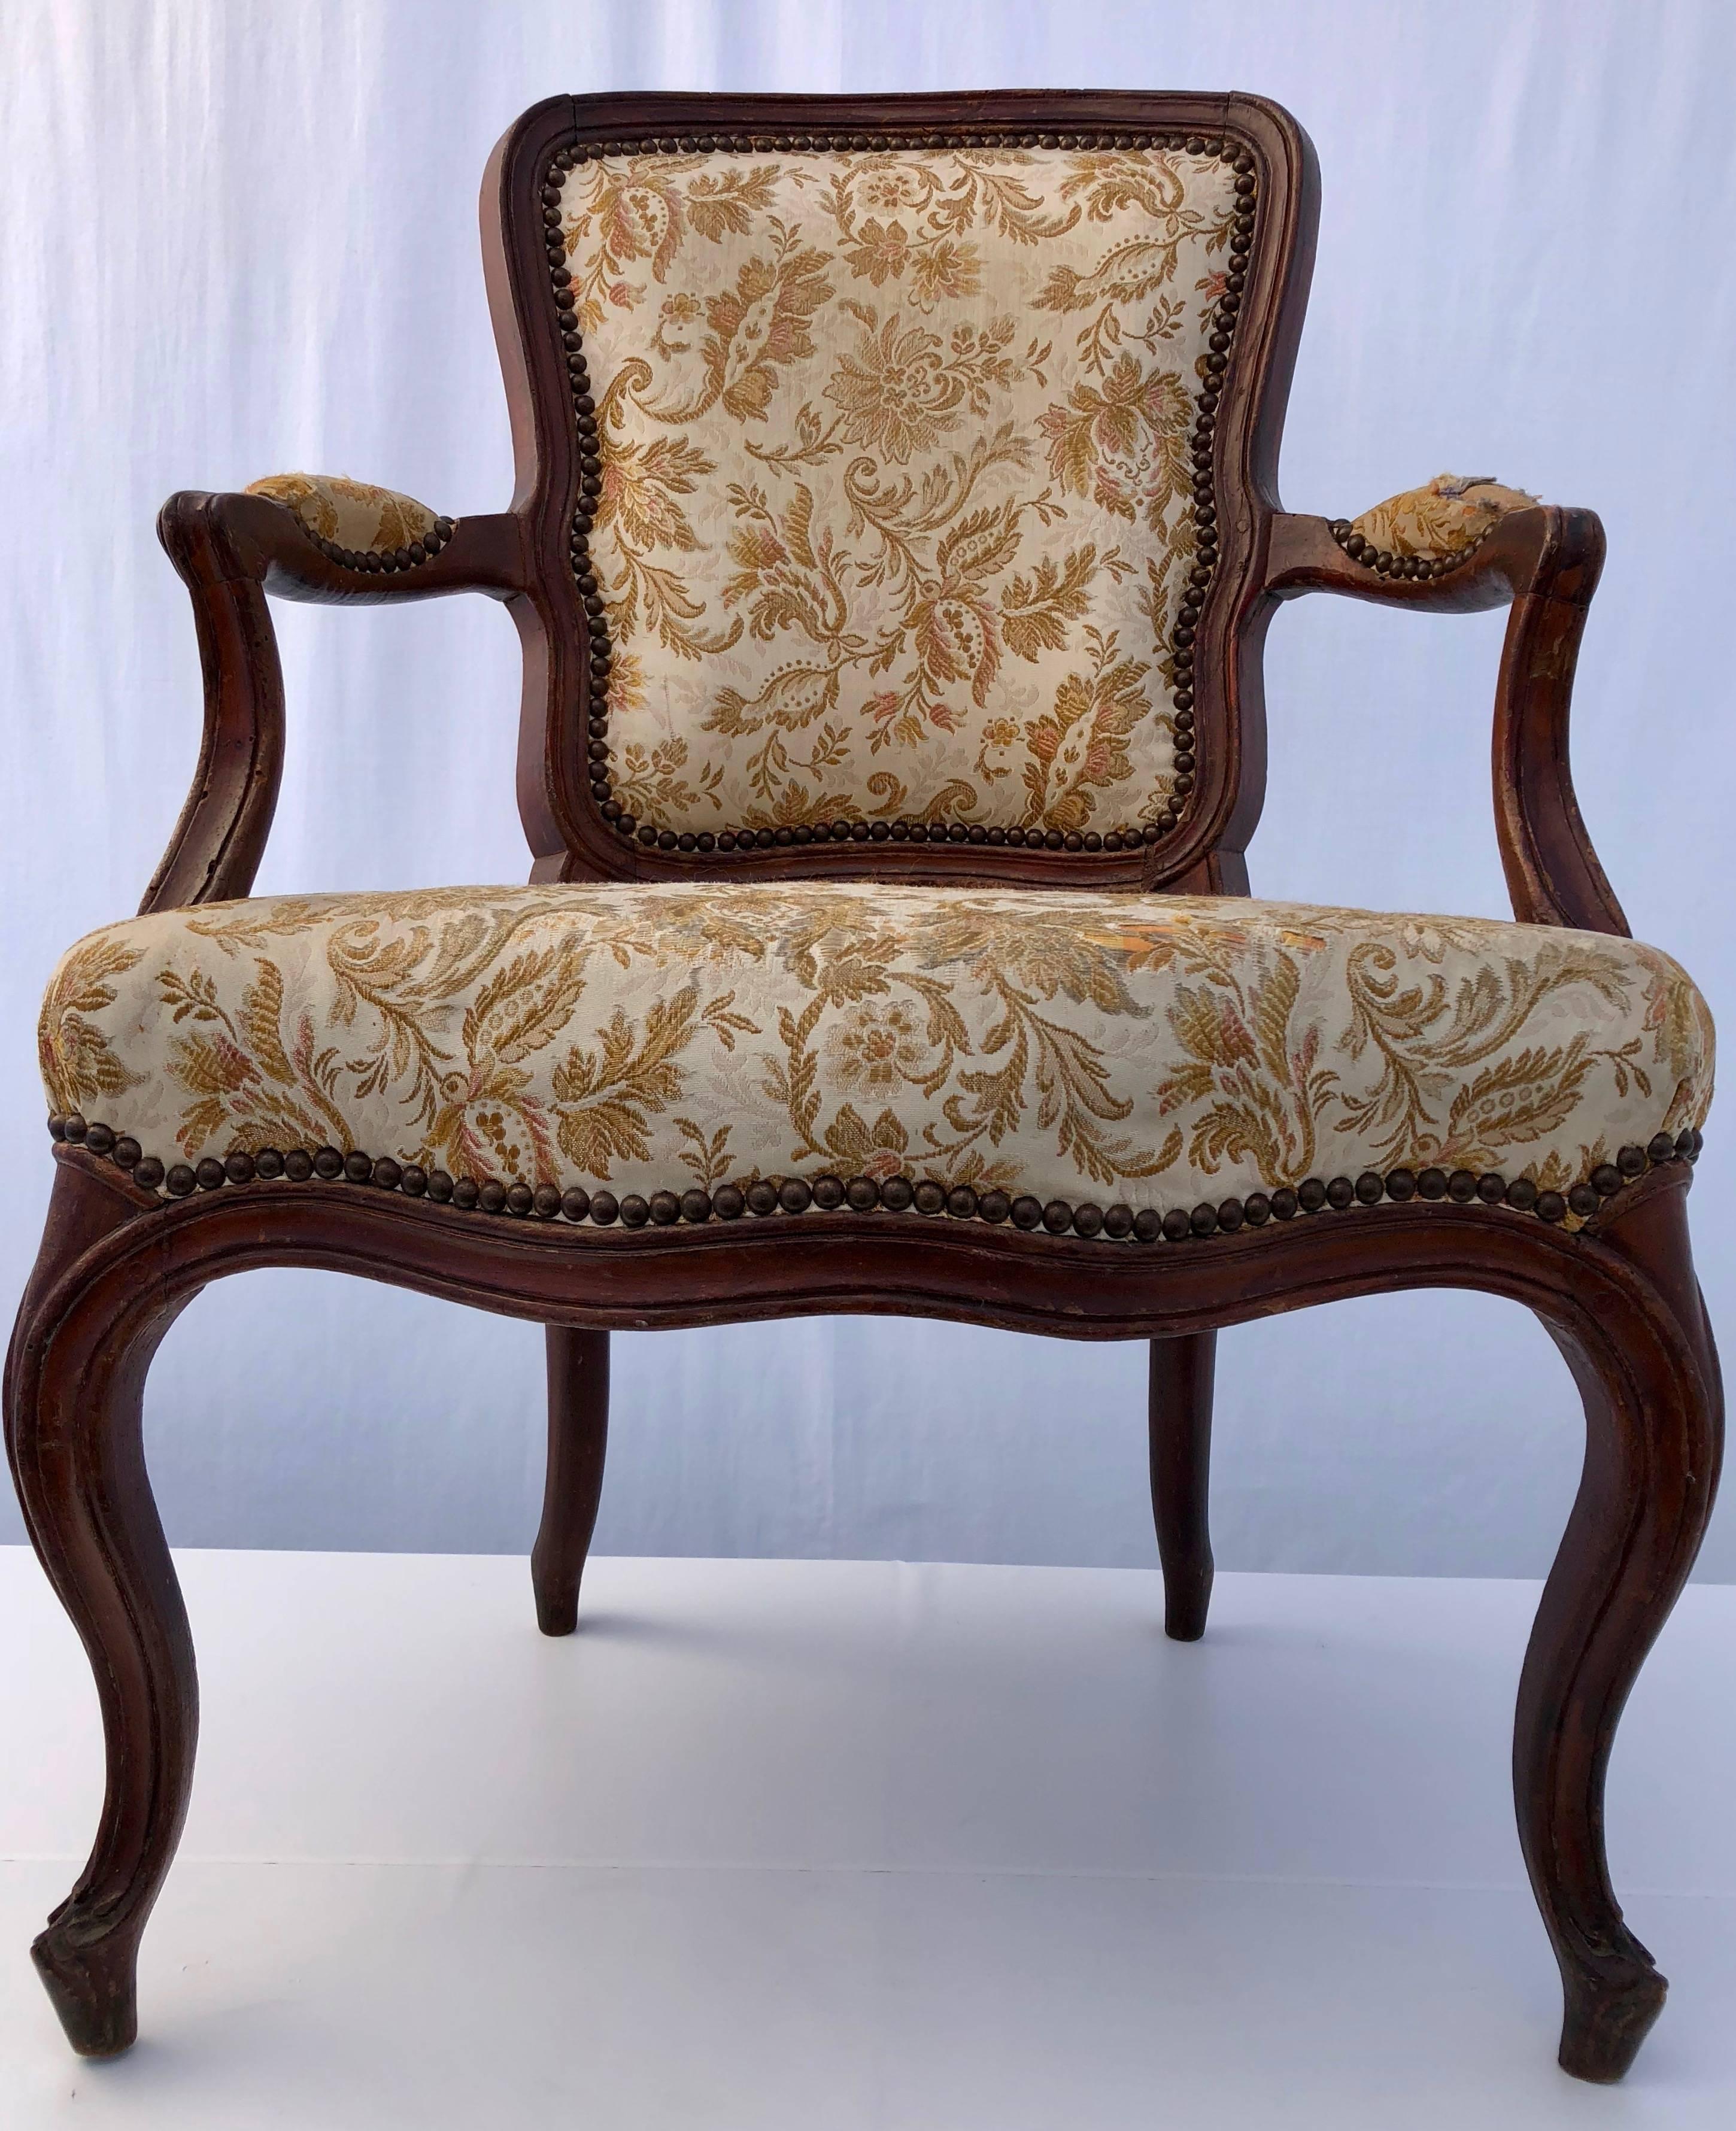 These are a great pair of French upholstered Regency style armchairs. They are very comfortable and well made. They are from the late 1800s.